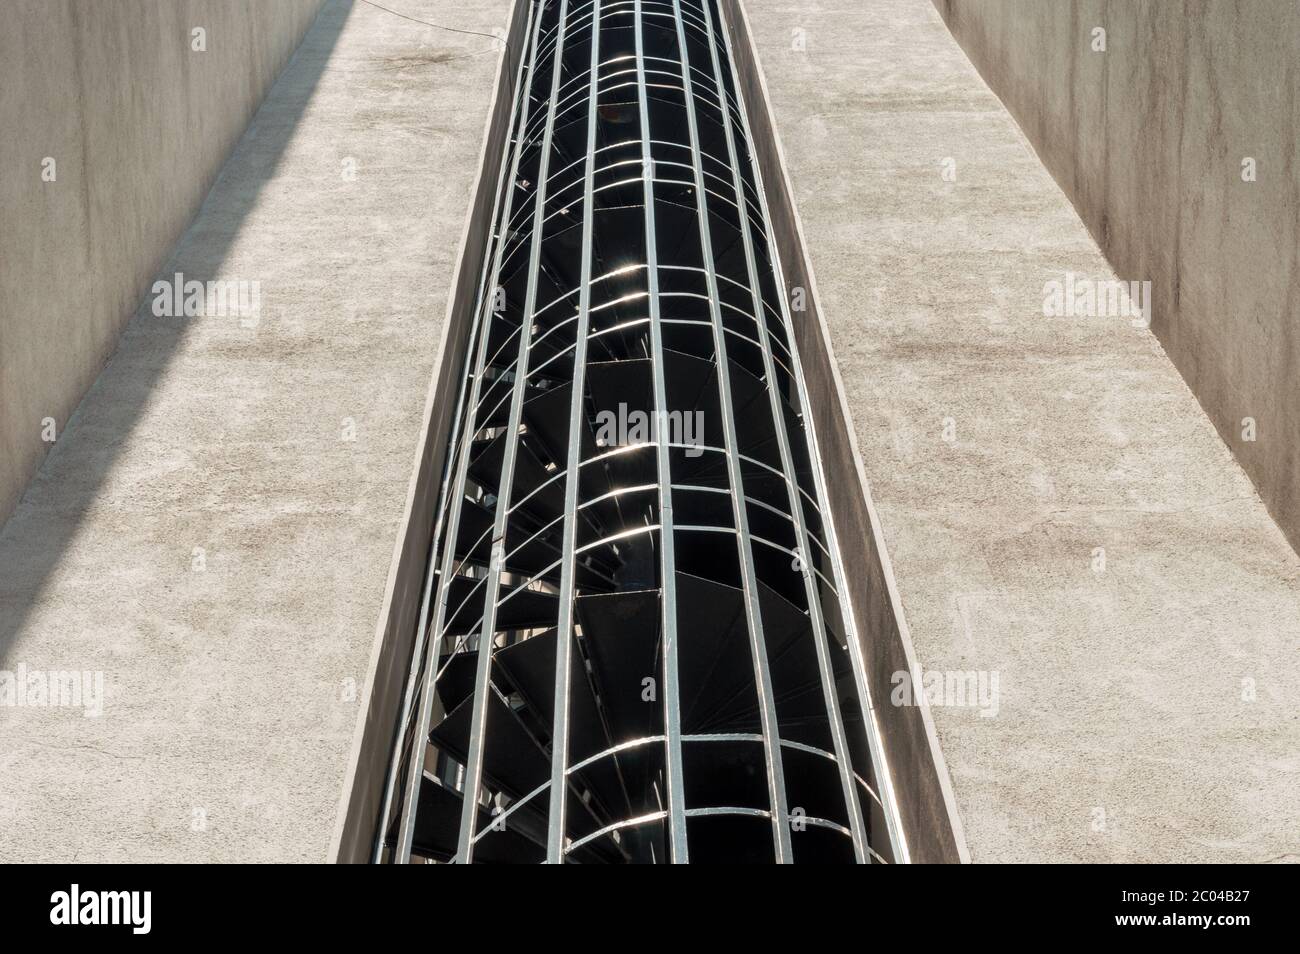 Low angle view of a spiral external fire escape staircase of a building Stock Photo